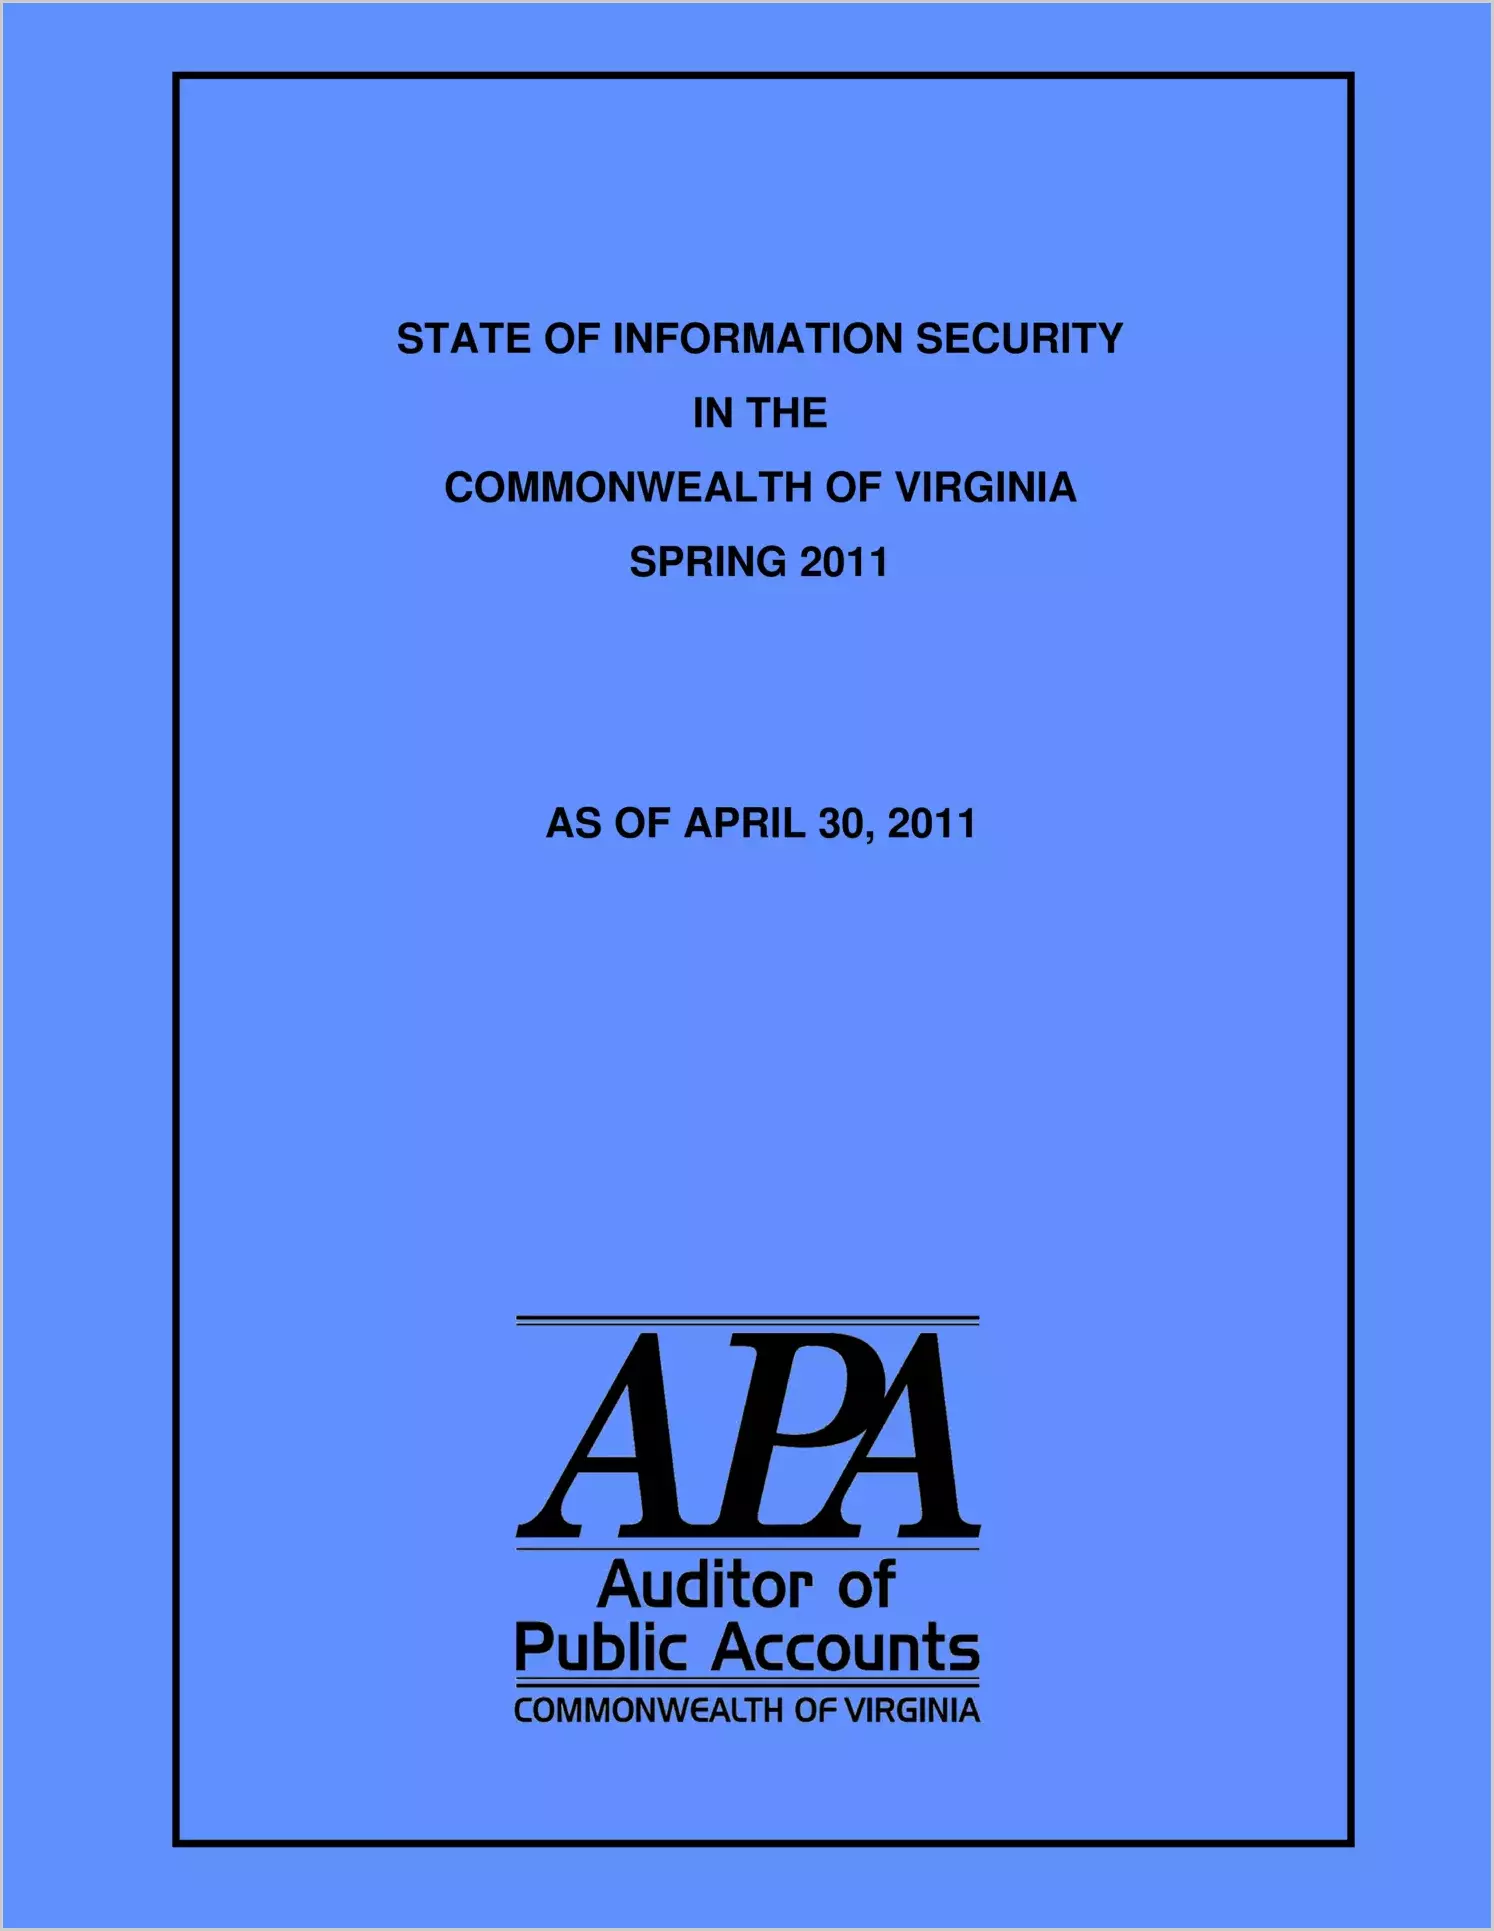 State of Information Security in the Commonwealth of Virginia - Spring 2011 - as of May 30, 2011